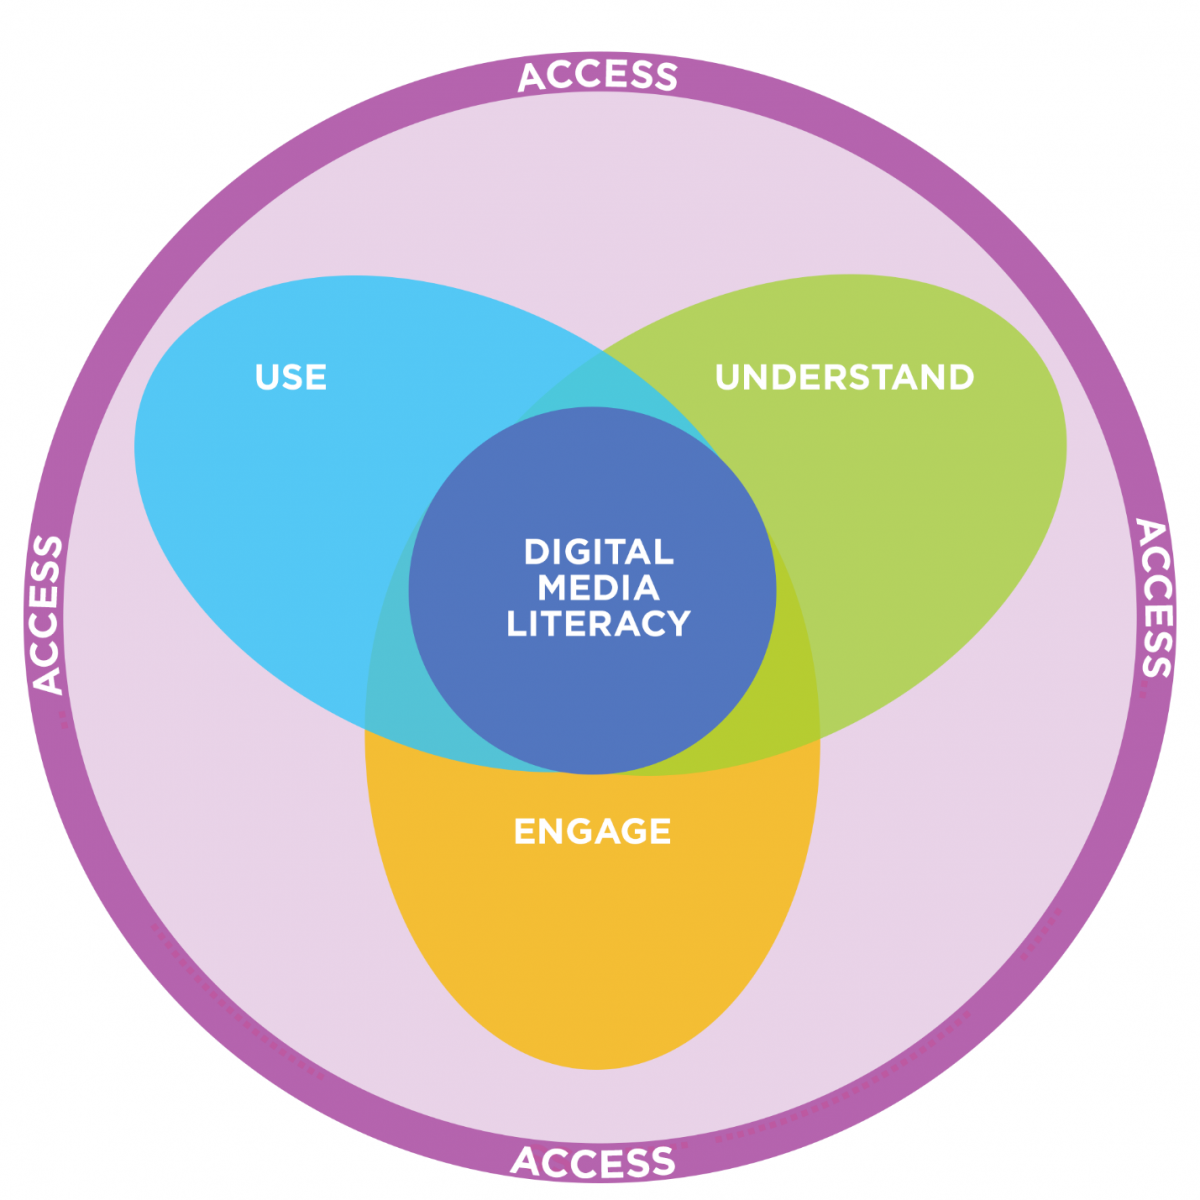 Graphic of the four main principles of digital media literacy competencies: Access, Use, Understand and Engange